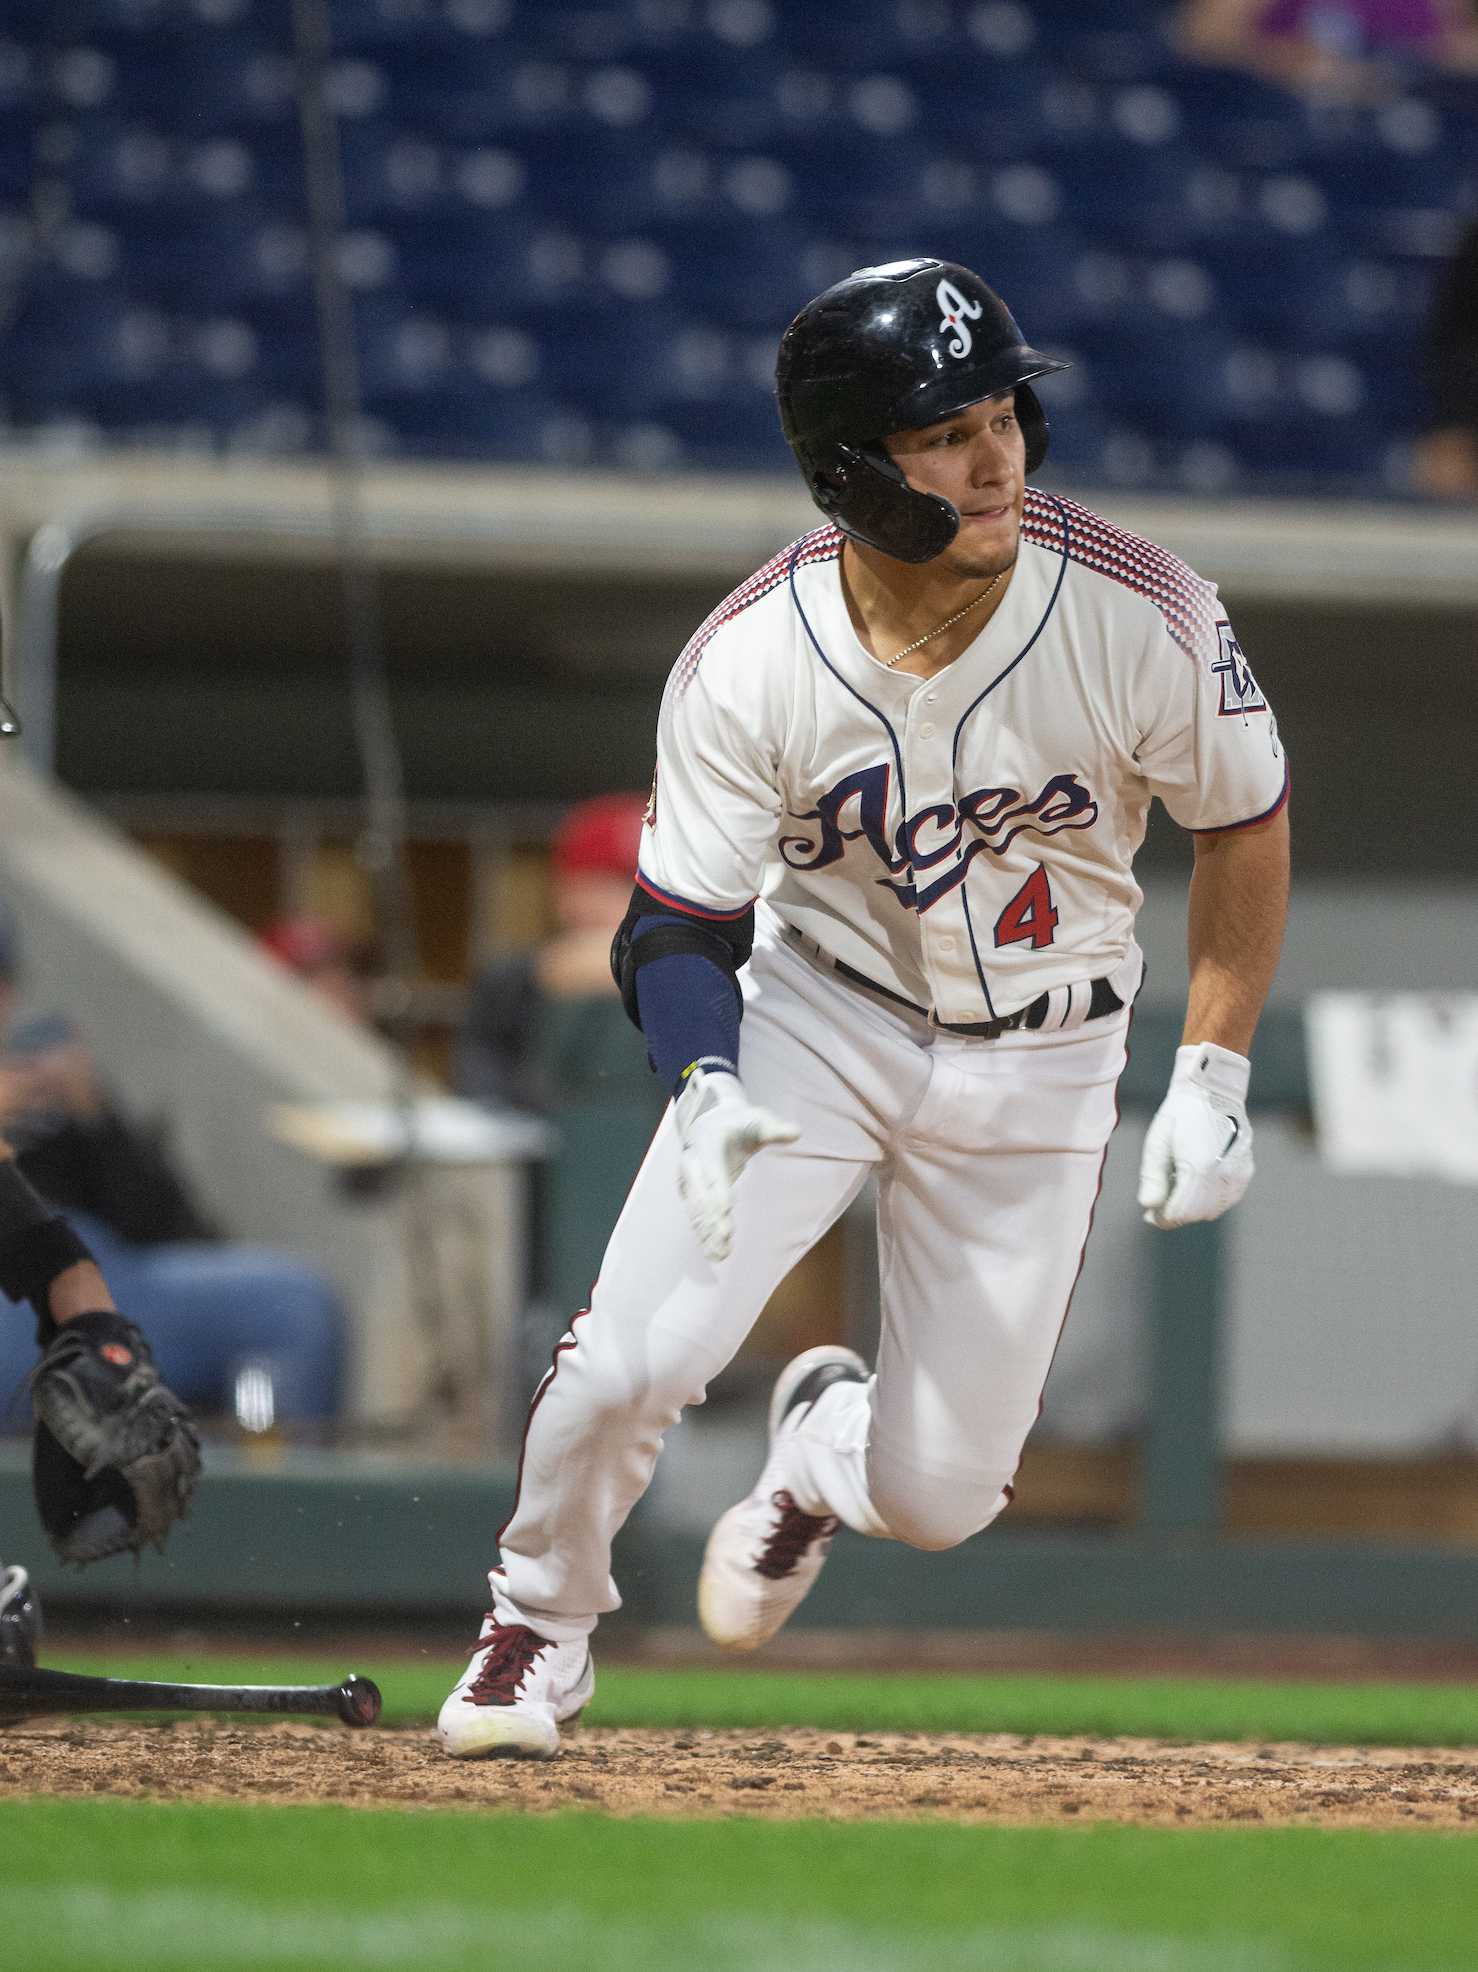 Reno Aces outfielder Alek Thomas running bases at a game, wearing a white  uniform with red number 4 and a blue batting helmet